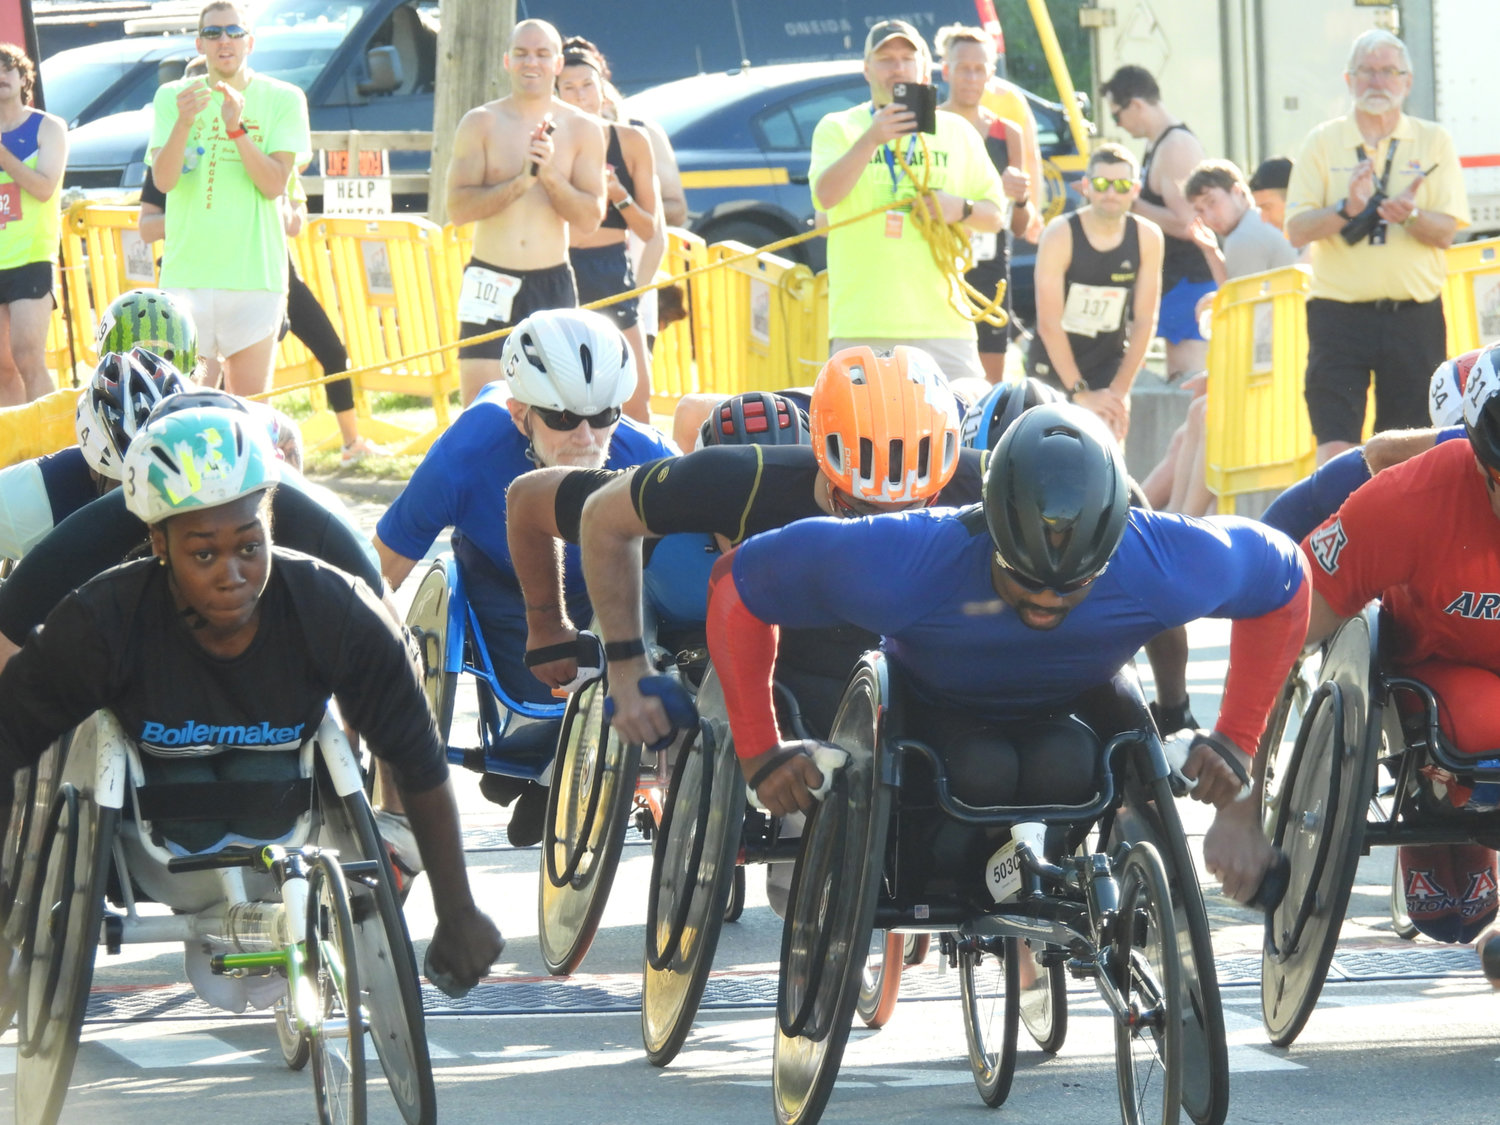 Wheelchair racers take off for the 45th Boilermaker Road Race on Sunday, July 10 in Utica.